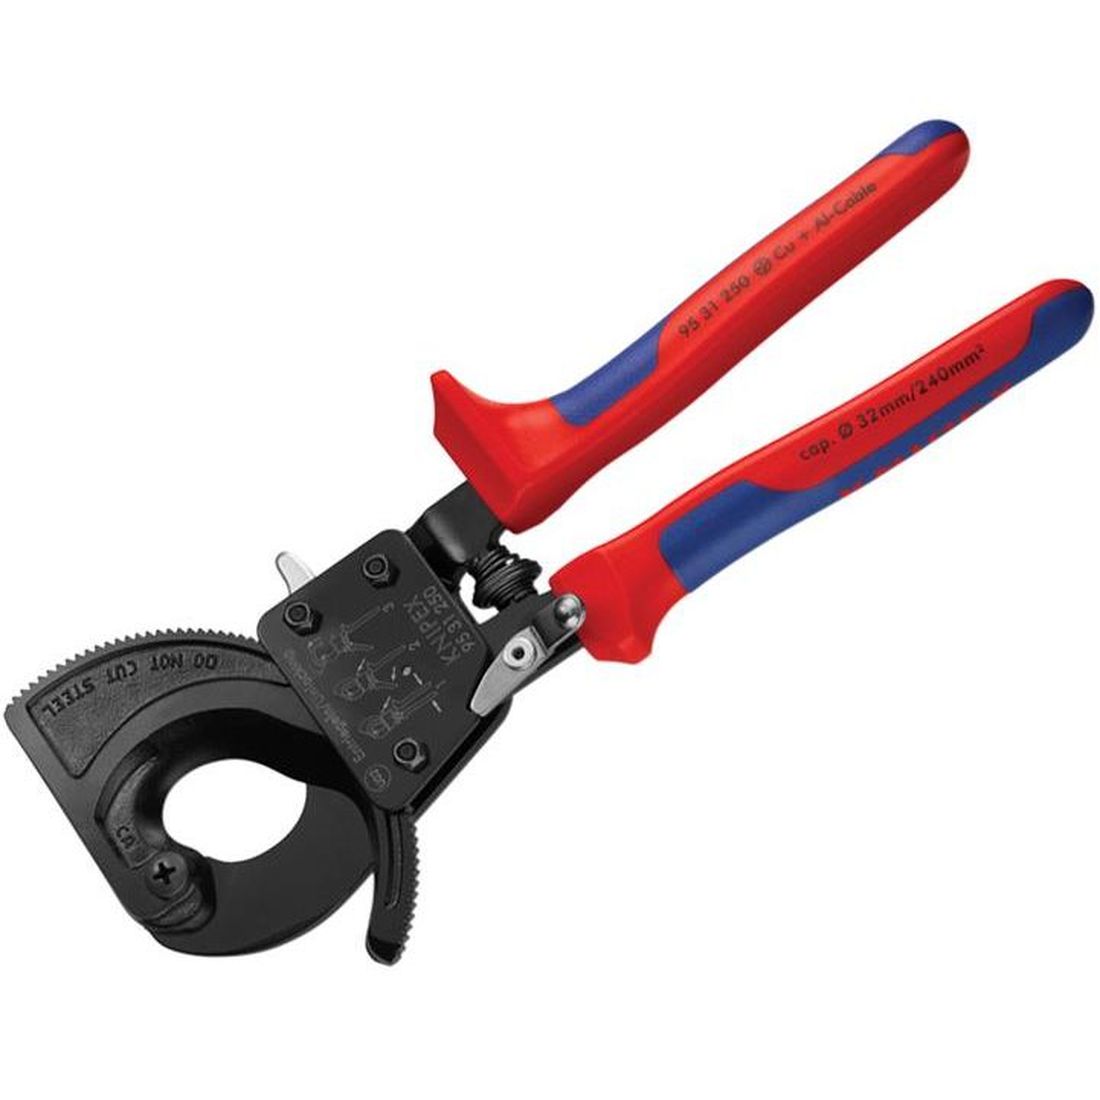 Knipex Ratchet Action Cable Shears Multi-Component Grip 250mm                          